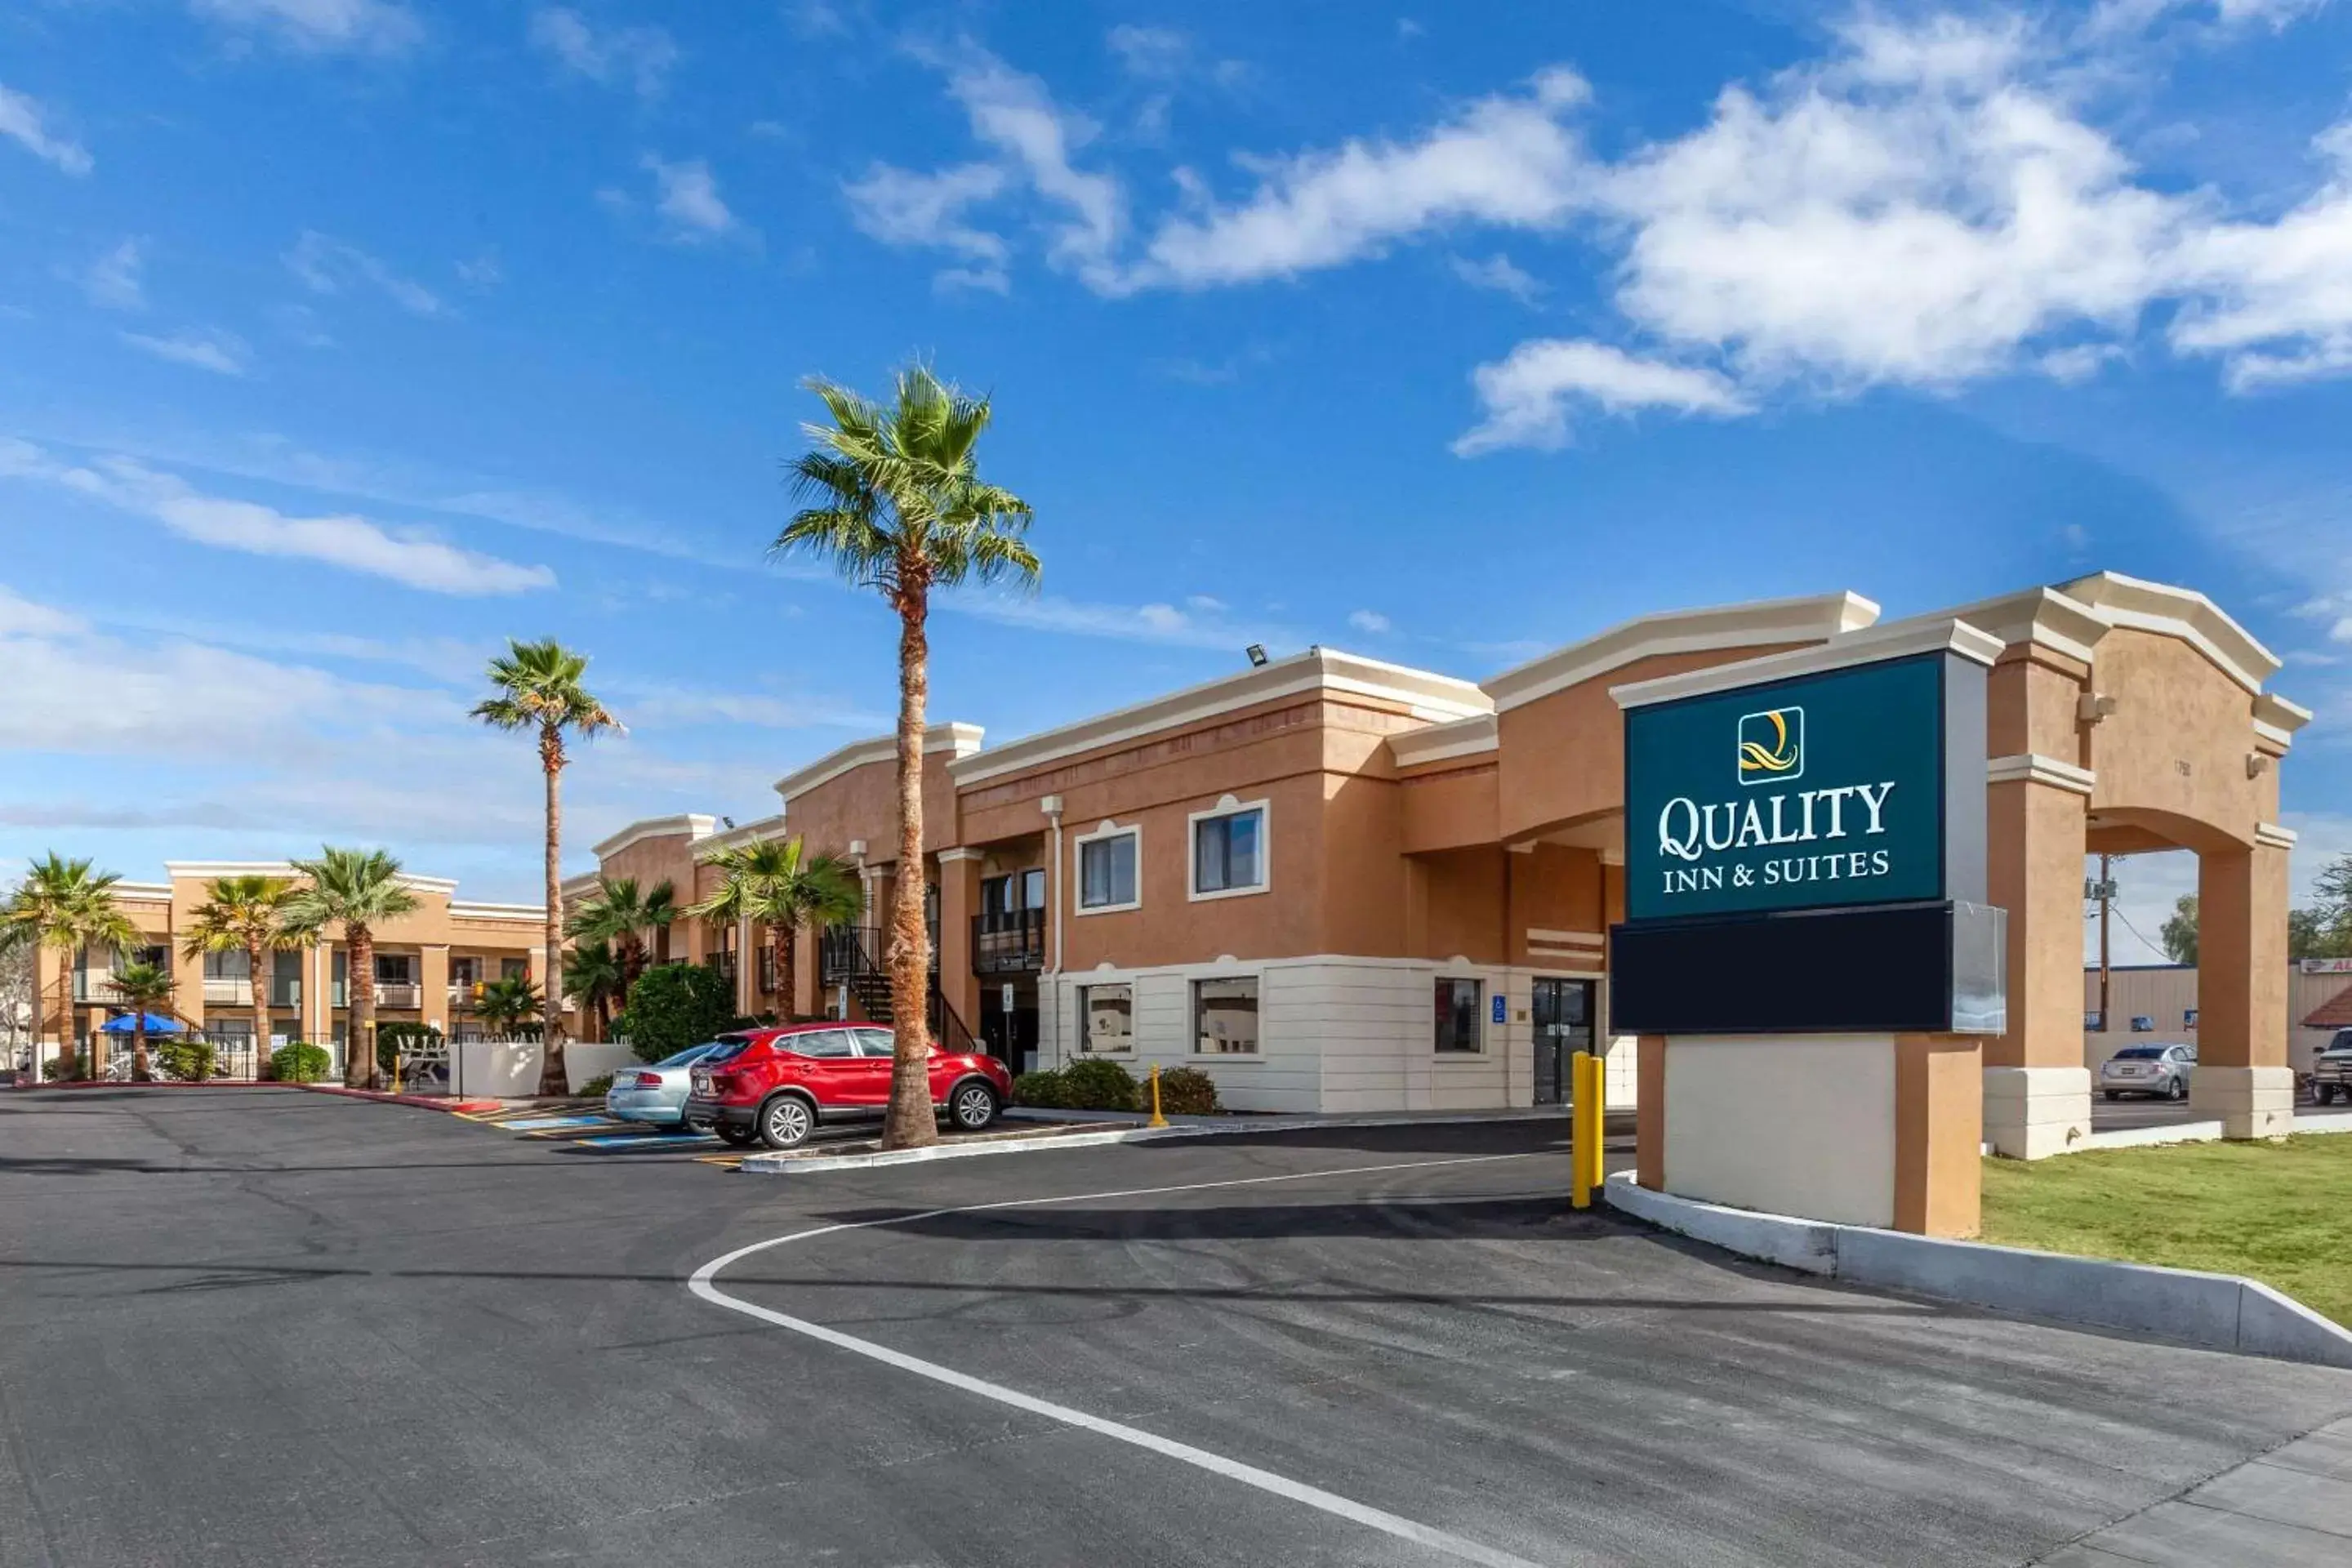 Property building in Quality Inn & Suites near Downtown Mesa